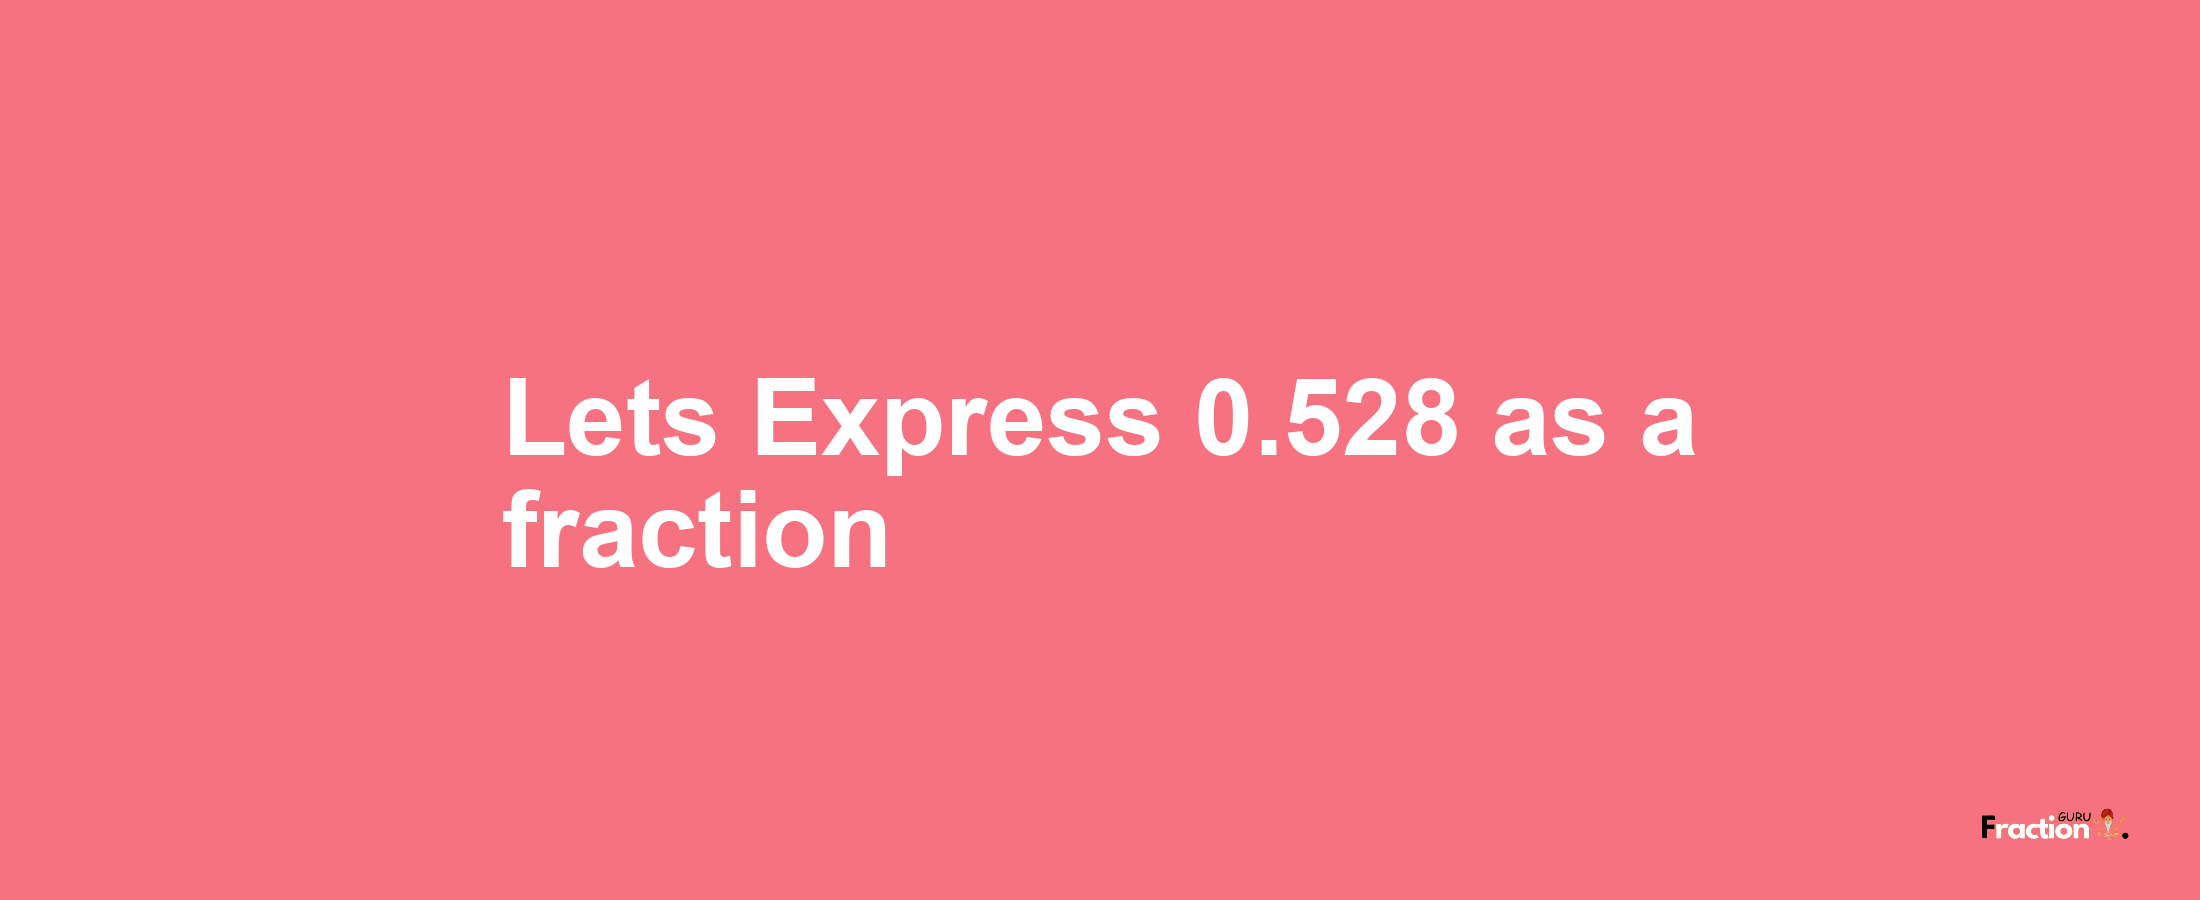 Lets Express 0.528 as afraction